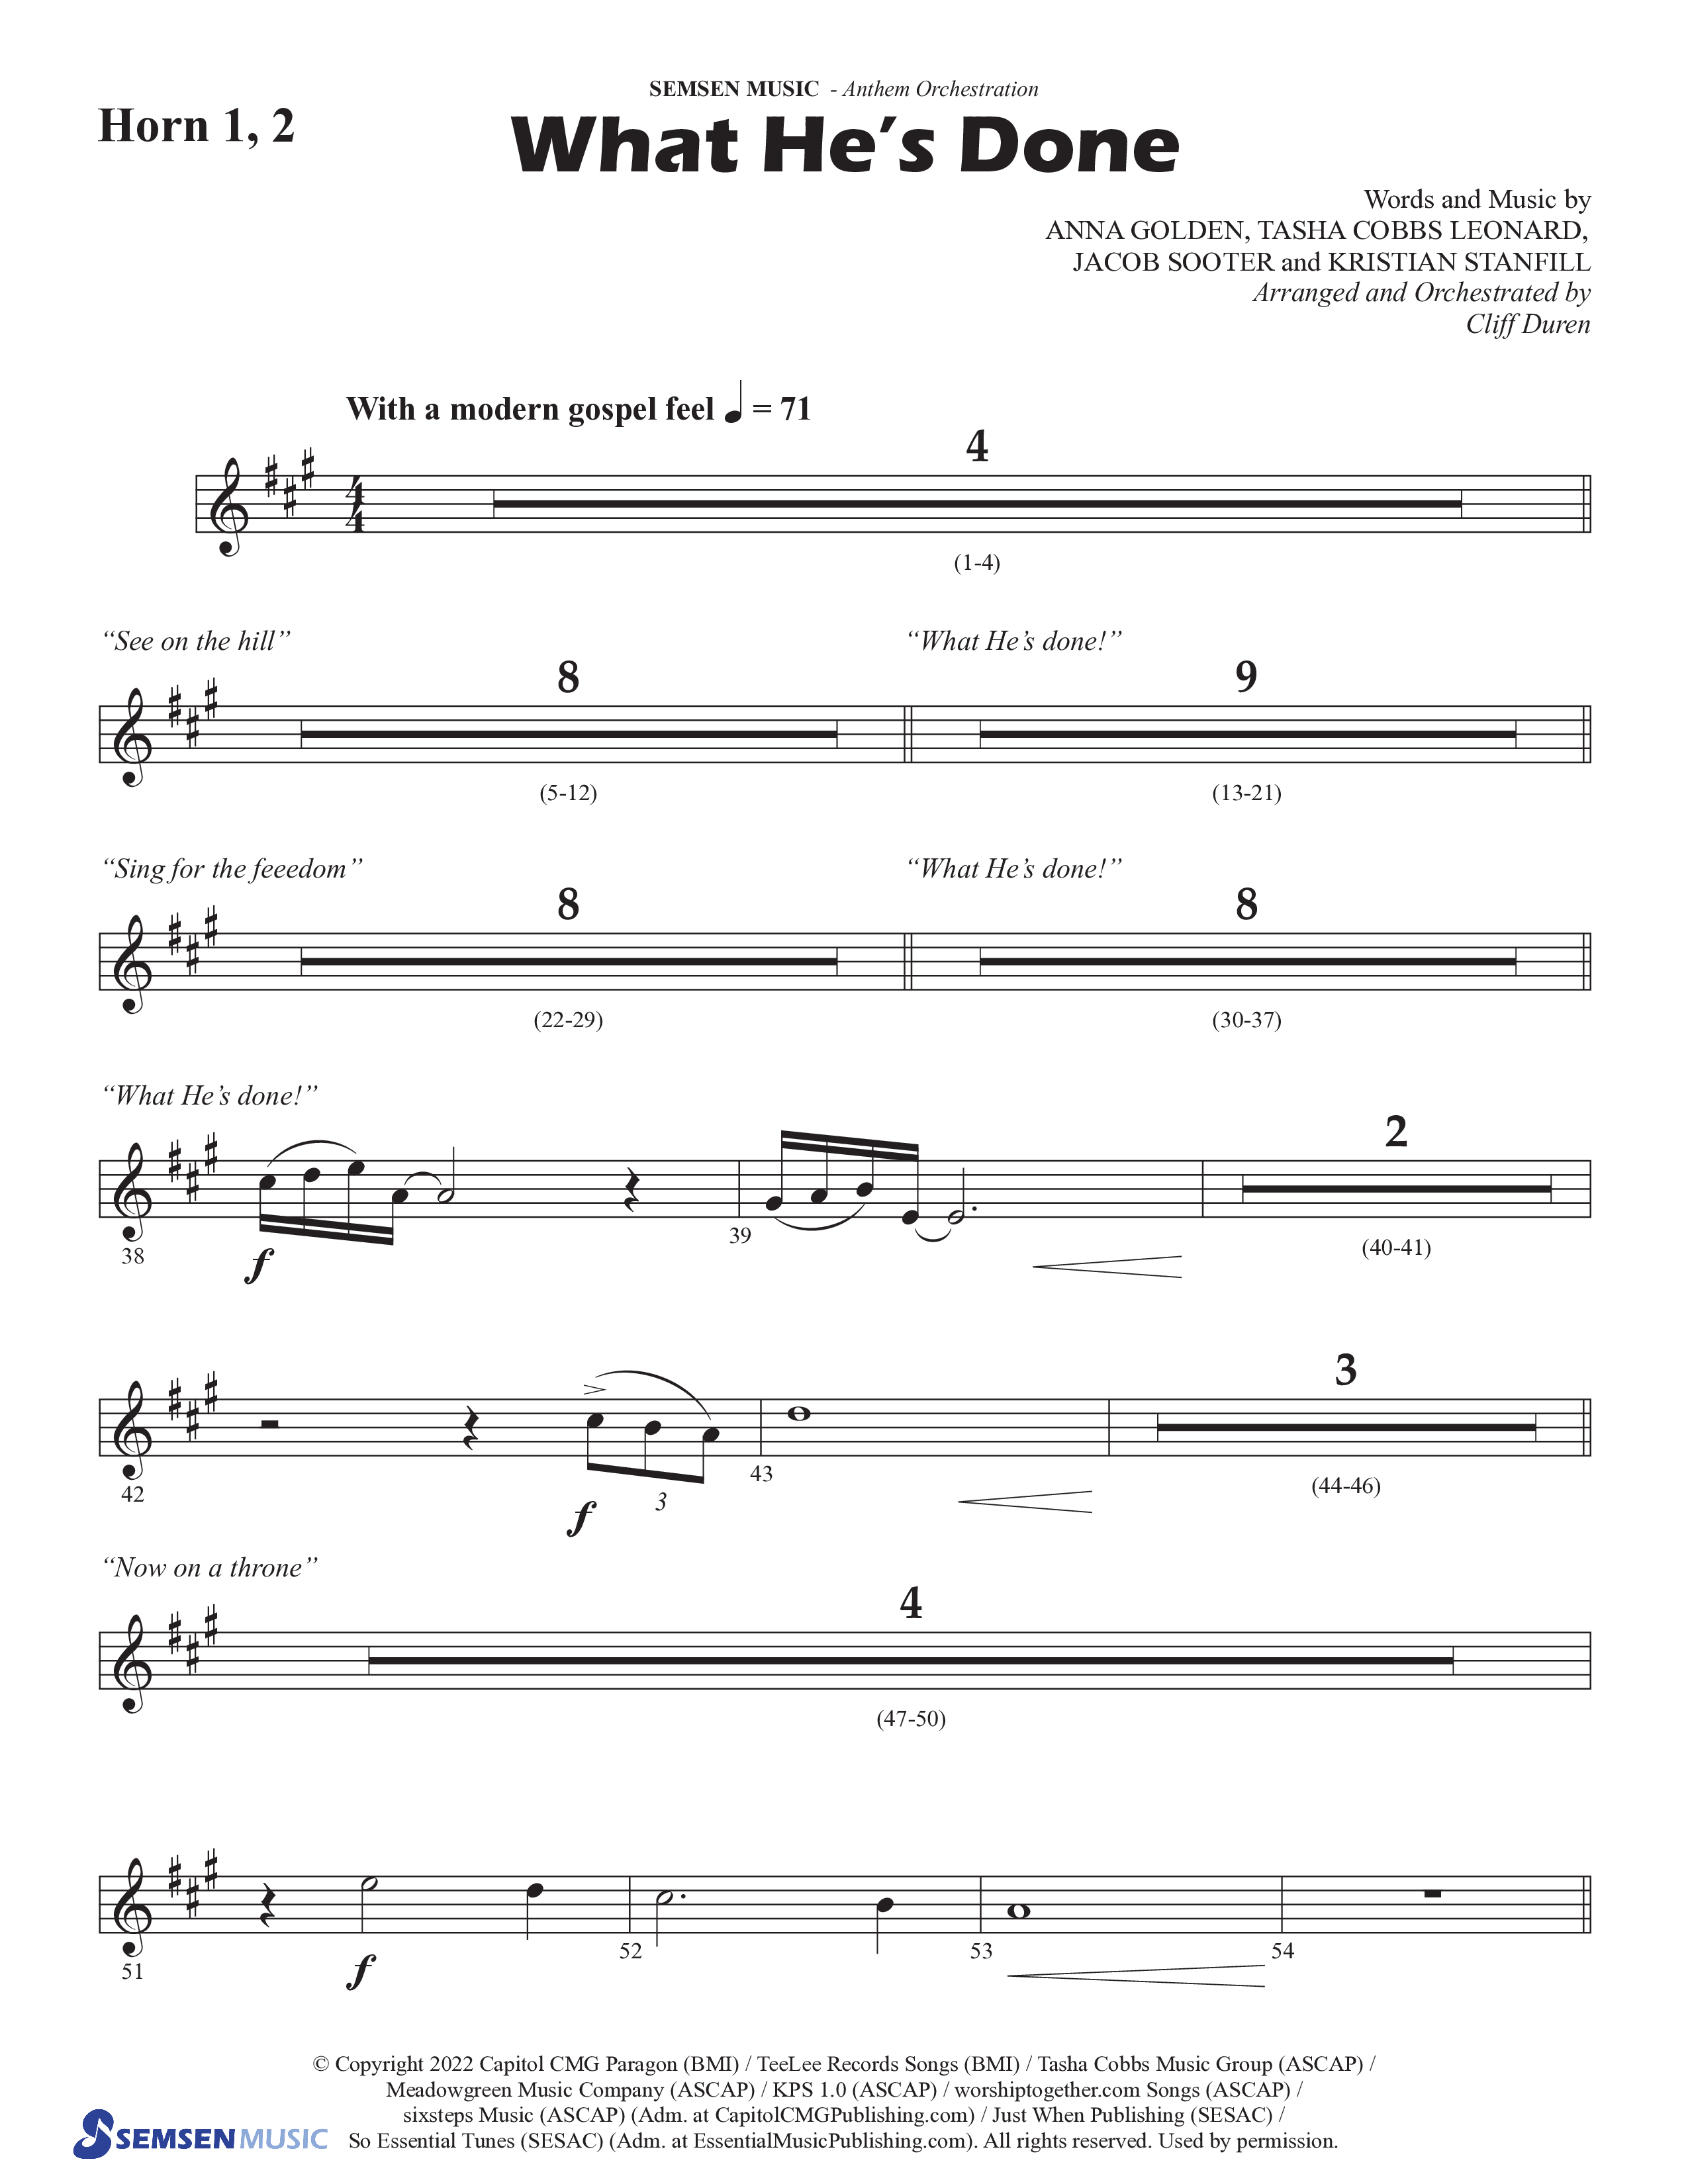 What He's Done (Choral Anthem SATB) French Horn 1/2 (Semsen Music / Arr. Cliff Duren)